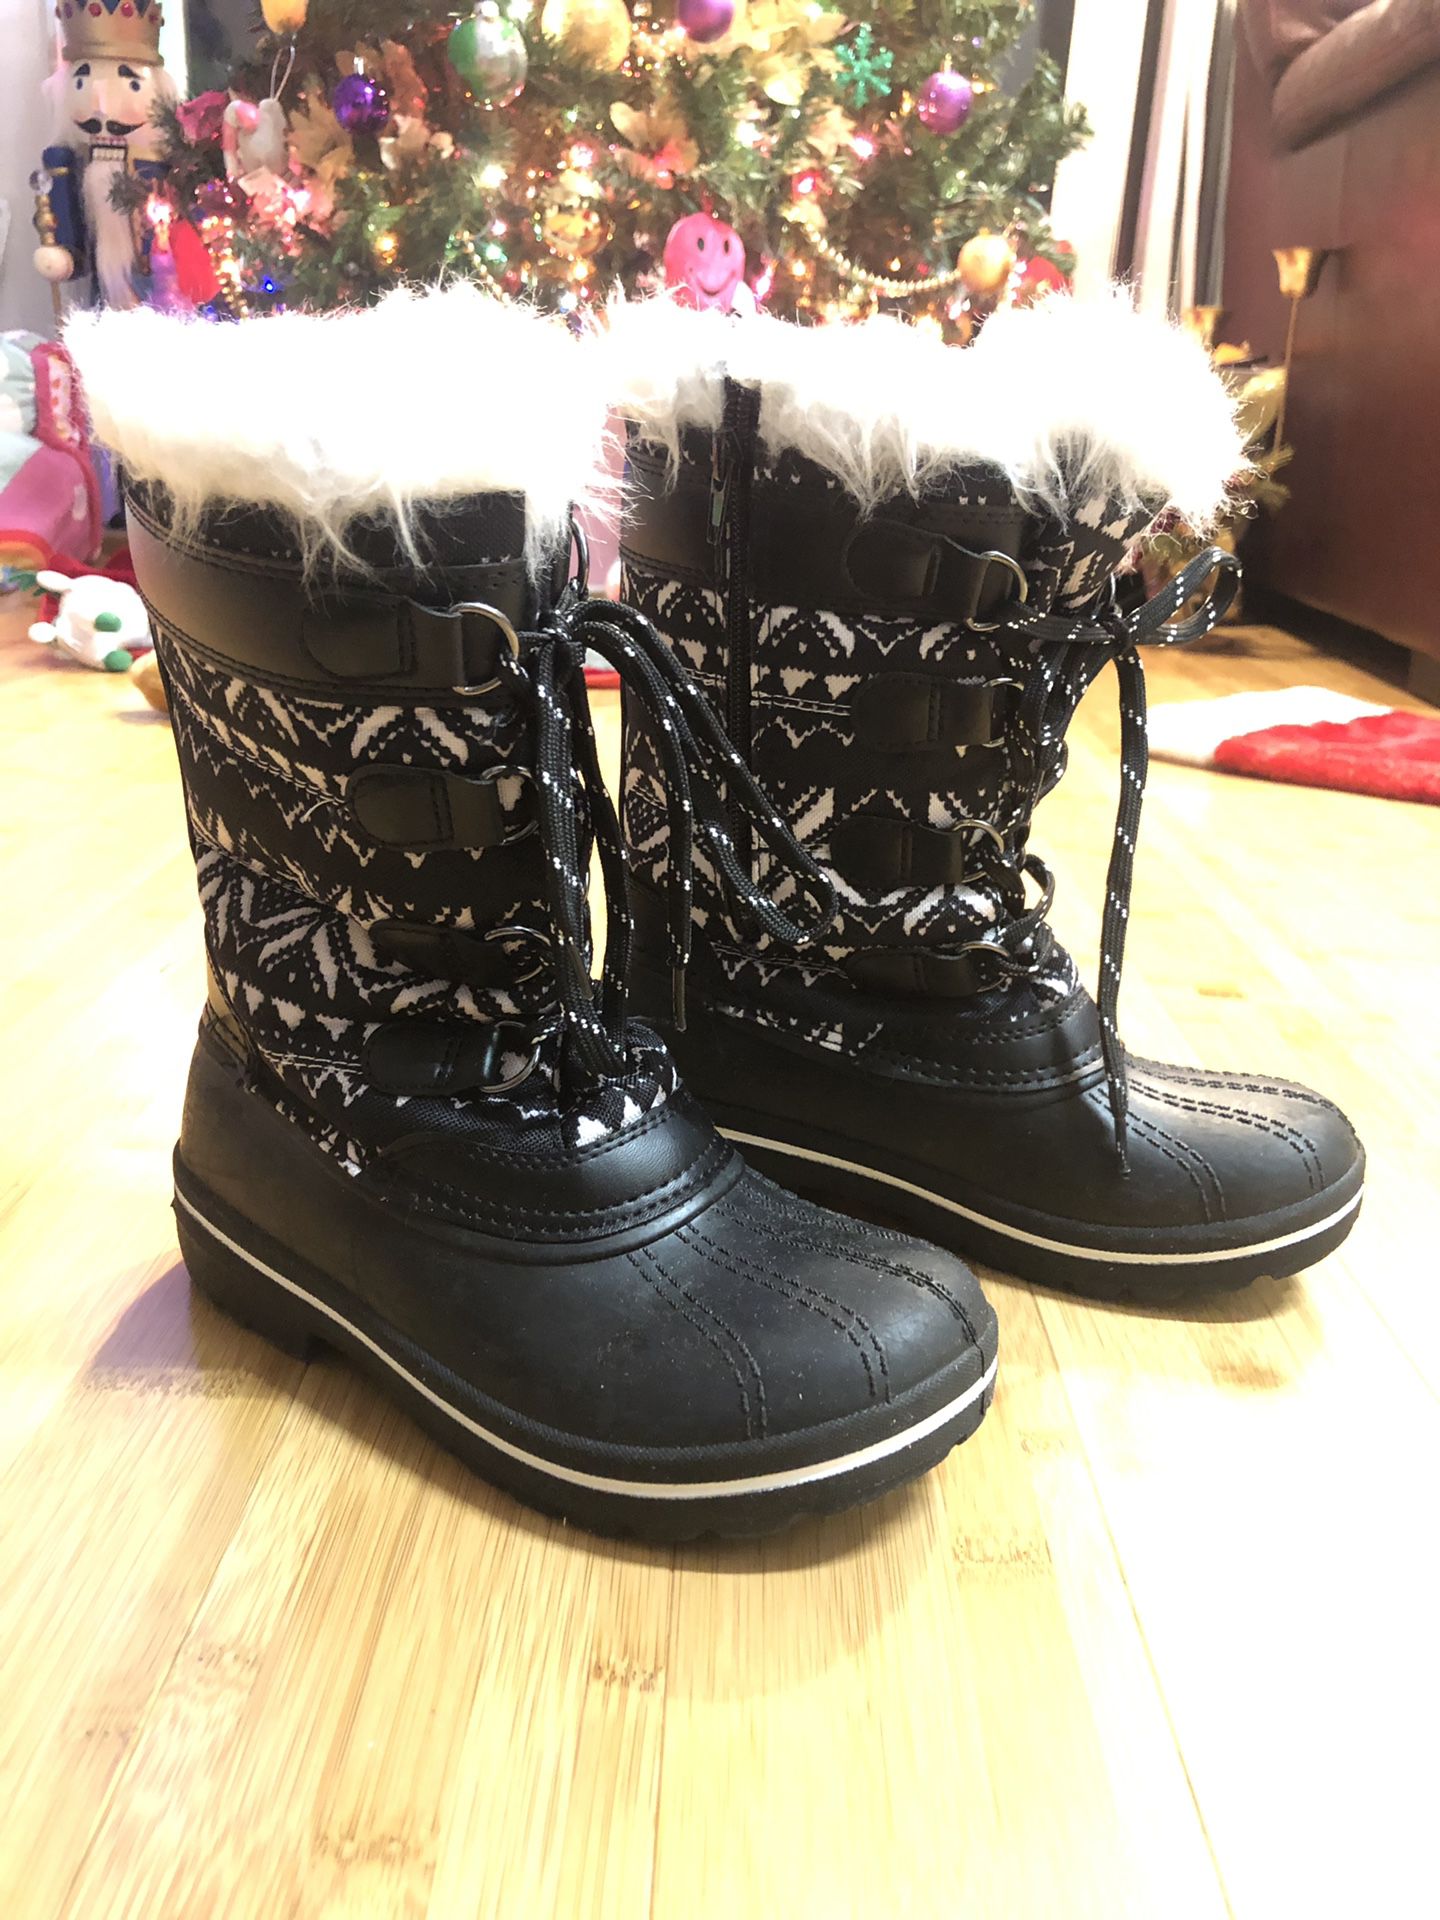 Girl’s Snow boots Size 2